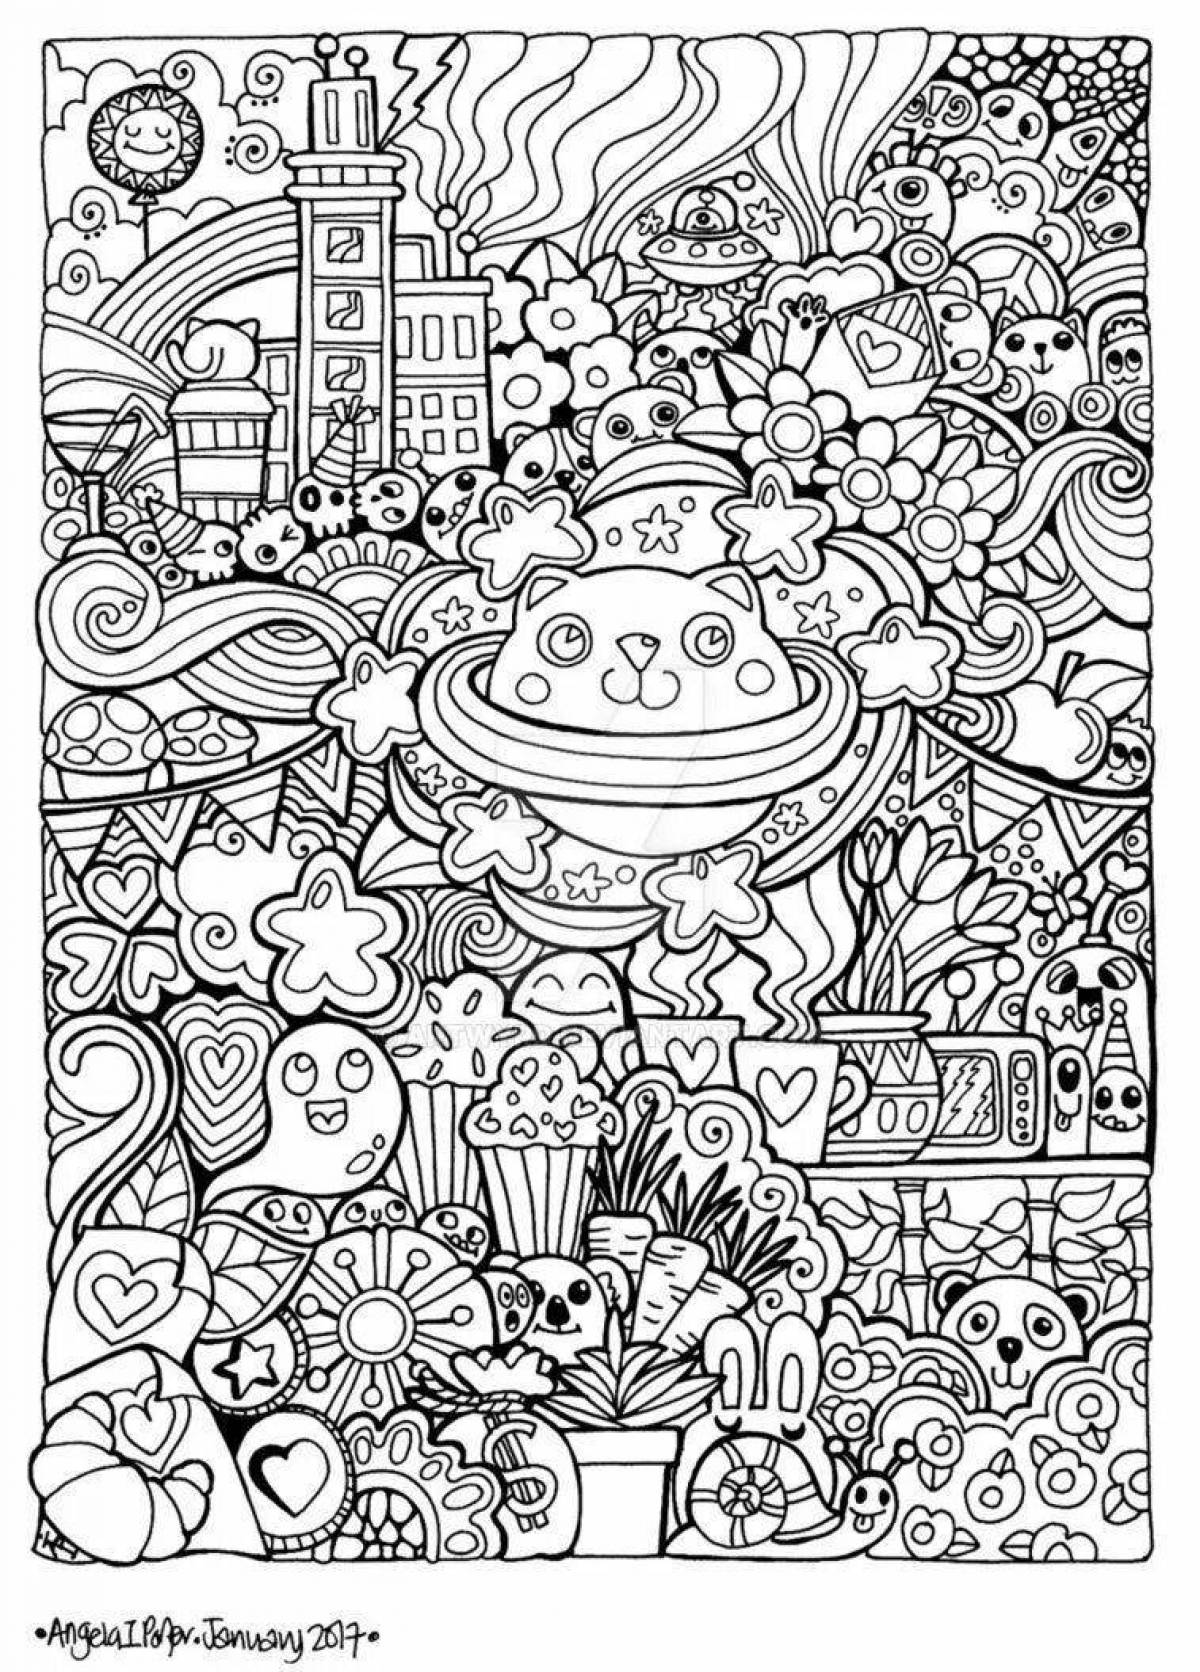 Live large anti-stress coloring book